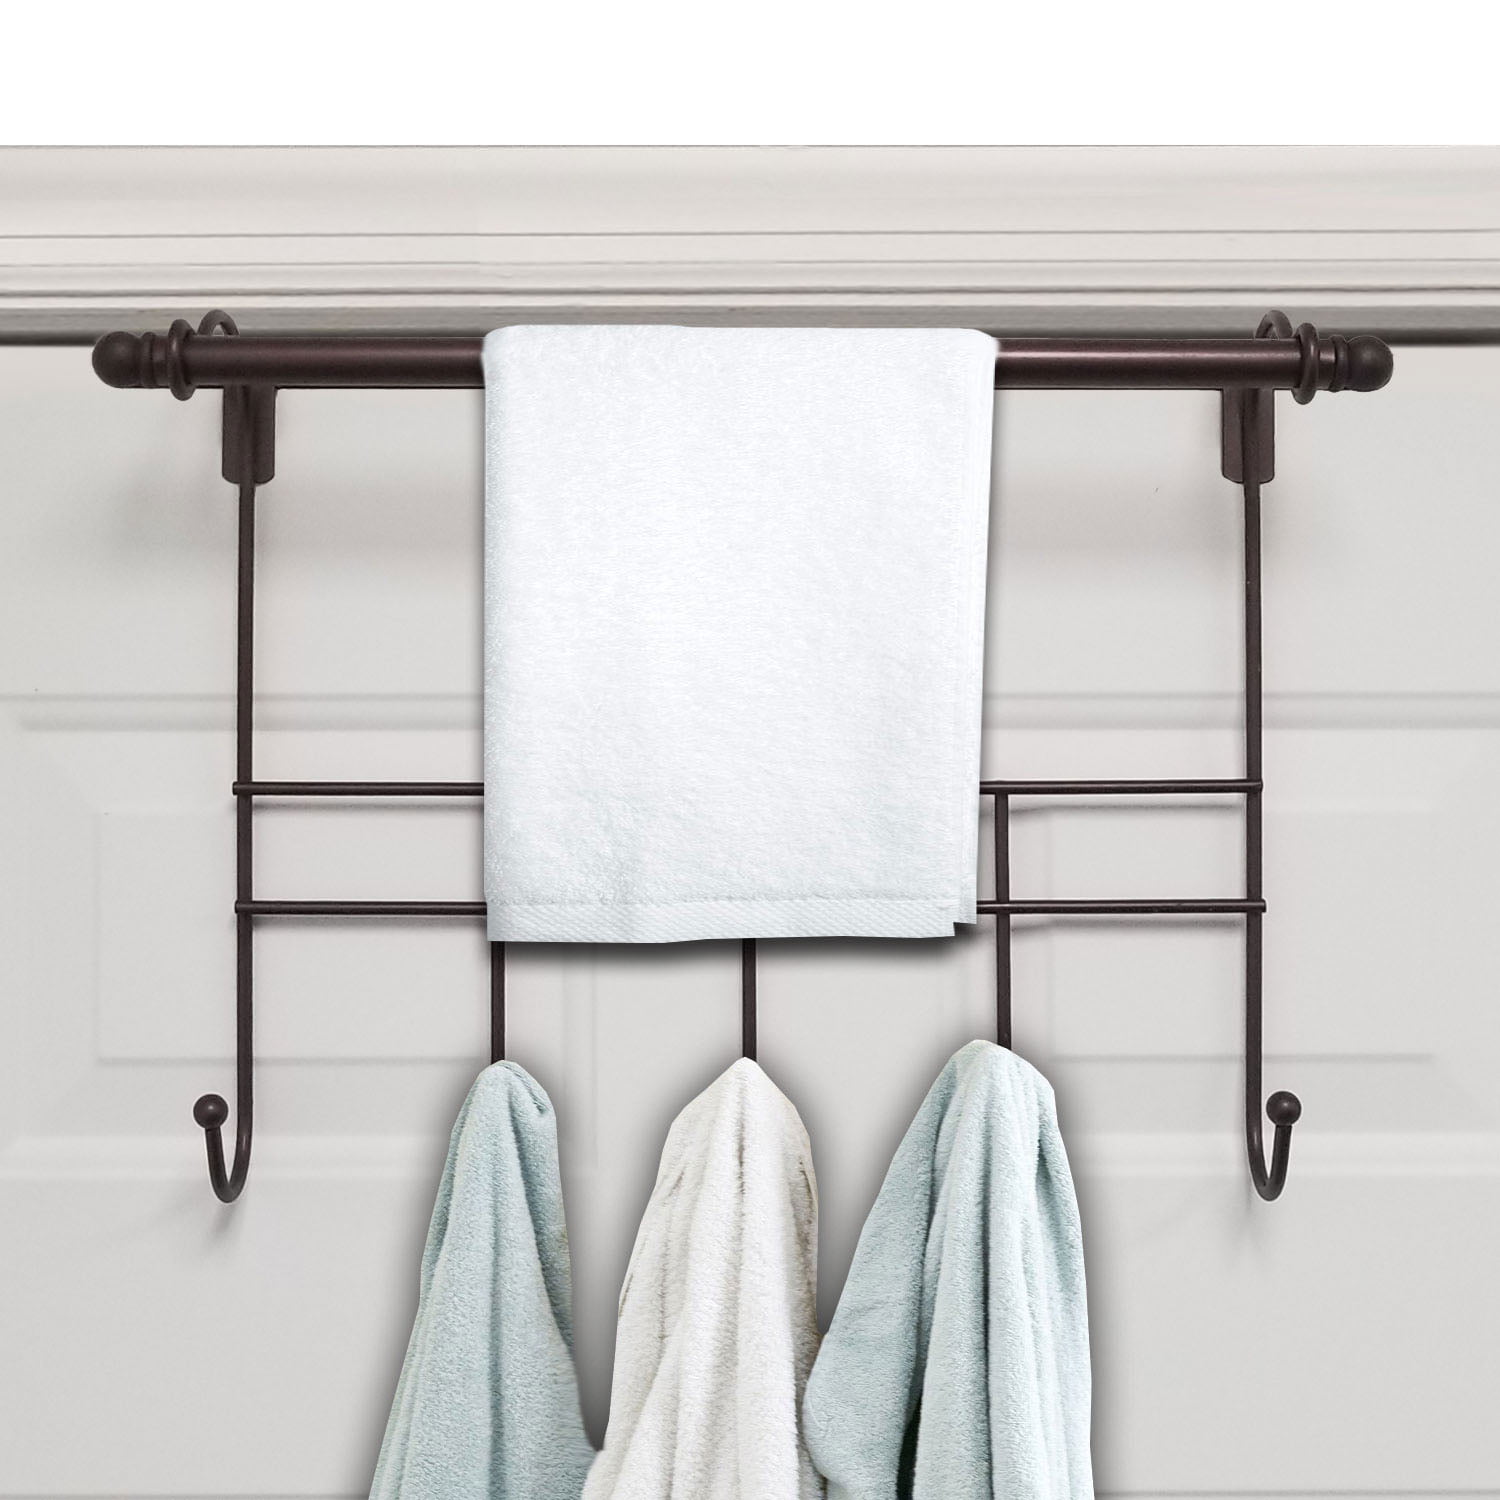 2 Tier Home Bath Wall Mount Storage Towel Rack Foldable No Tools Required Bronze 